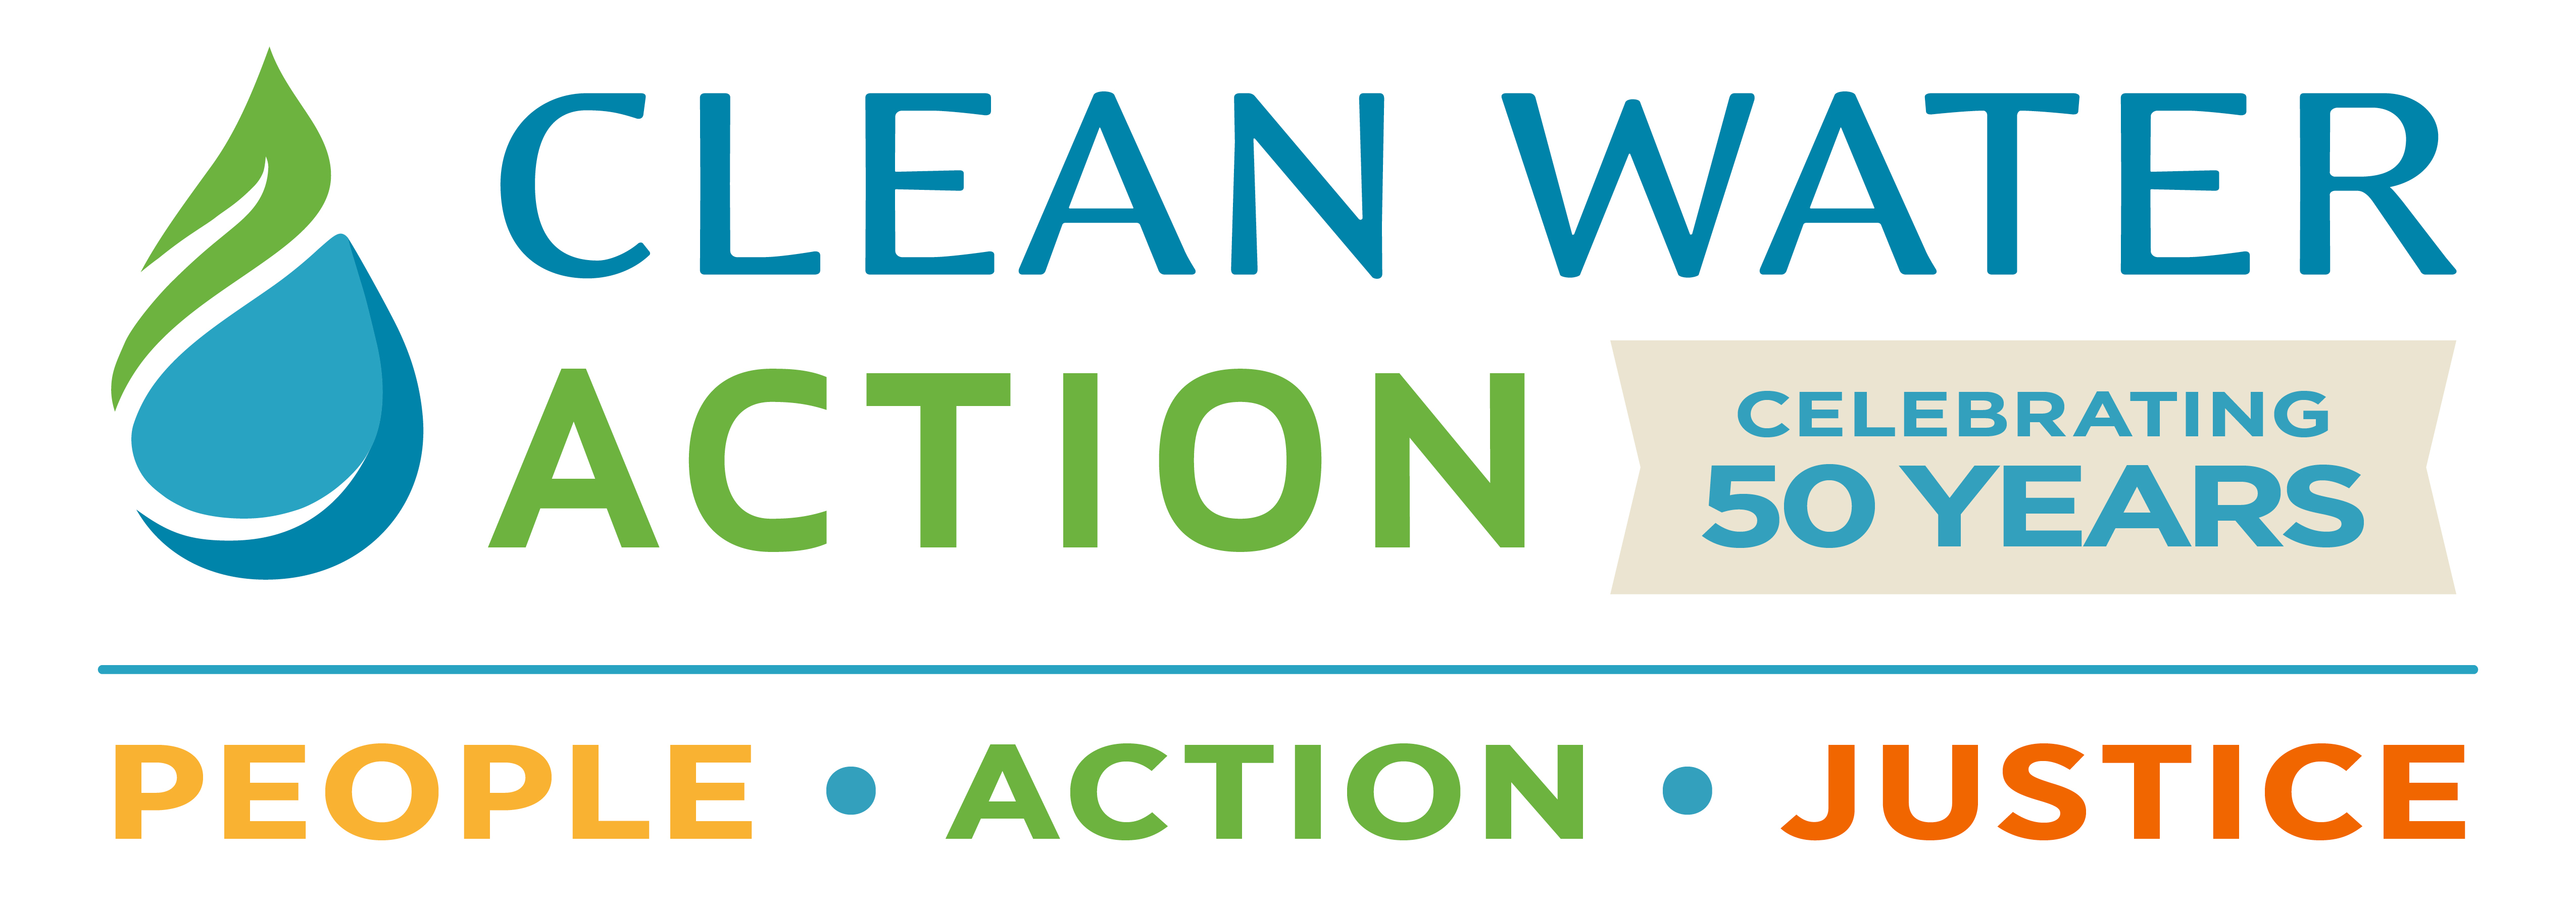 Clean Water Action